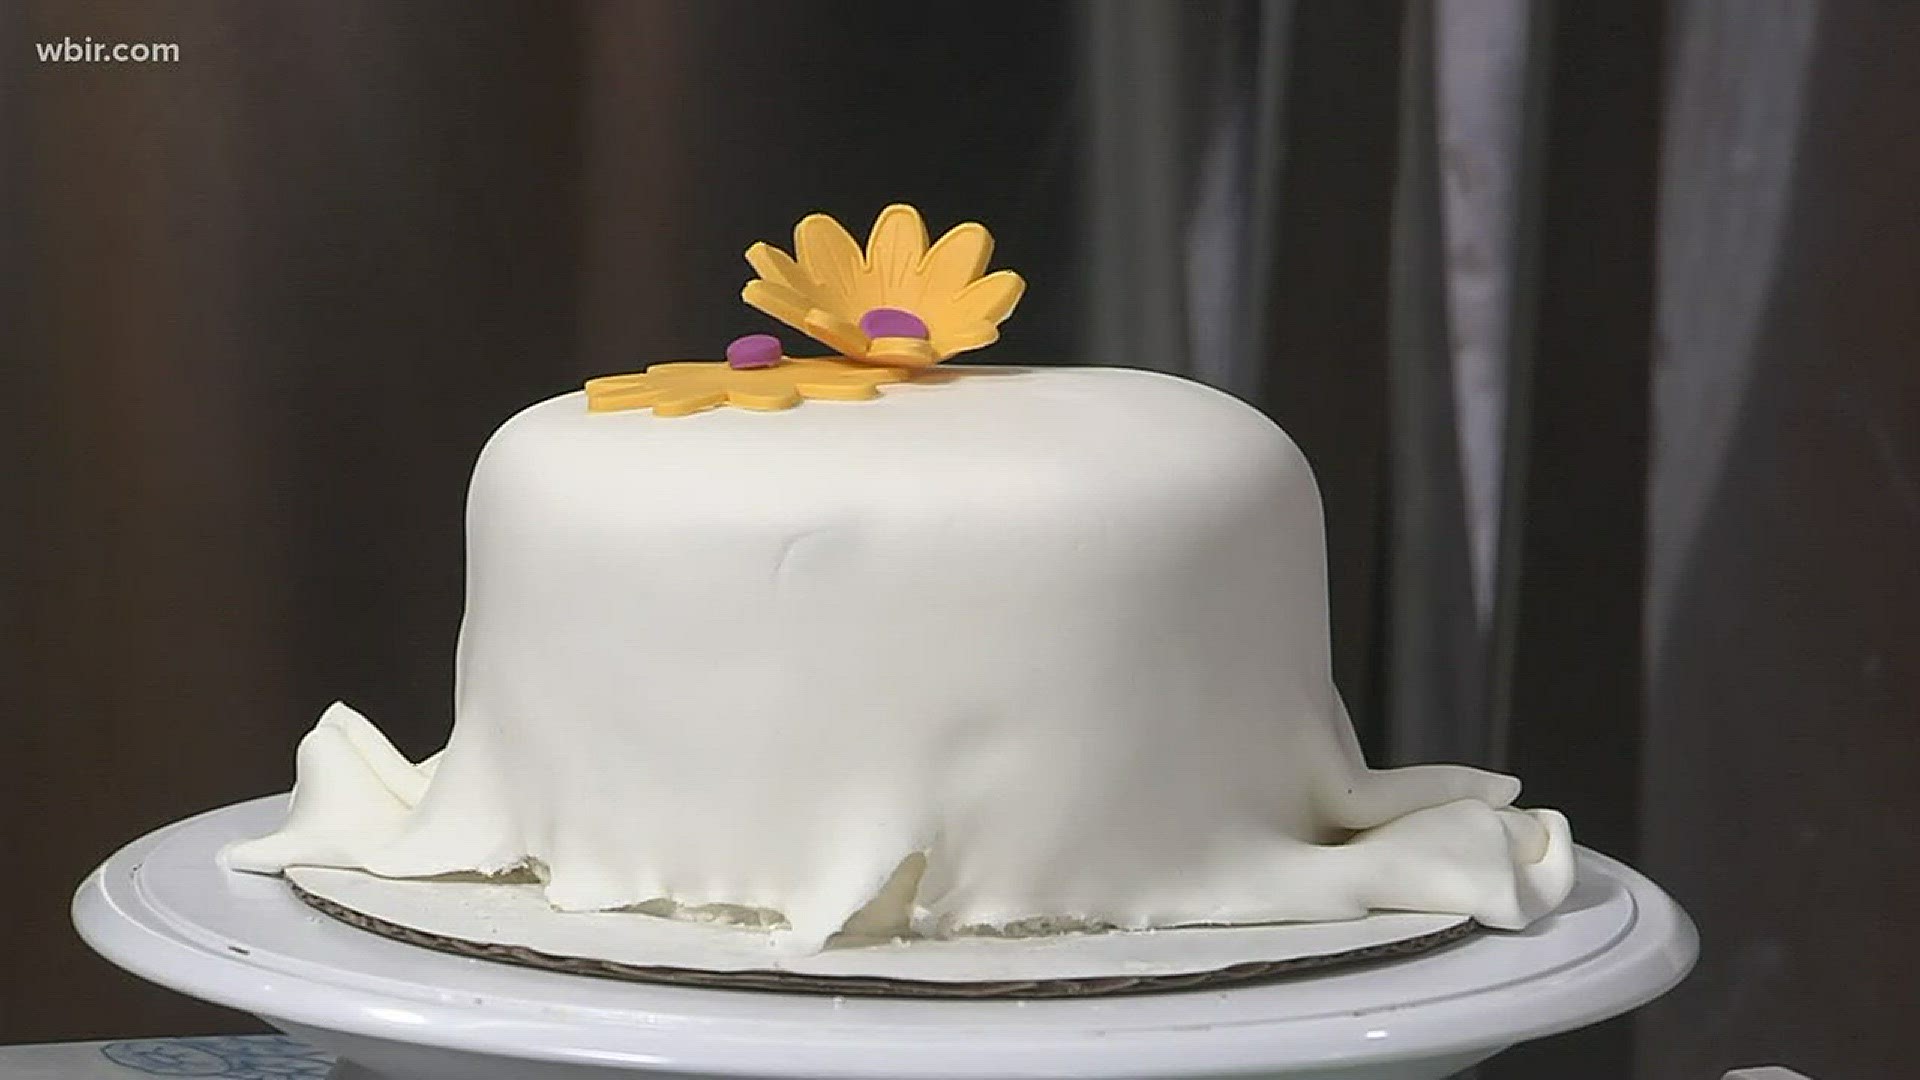 Chef Jocelyn from The Cutting Edge Classroom shows viewers how to decorate the perfect cake.